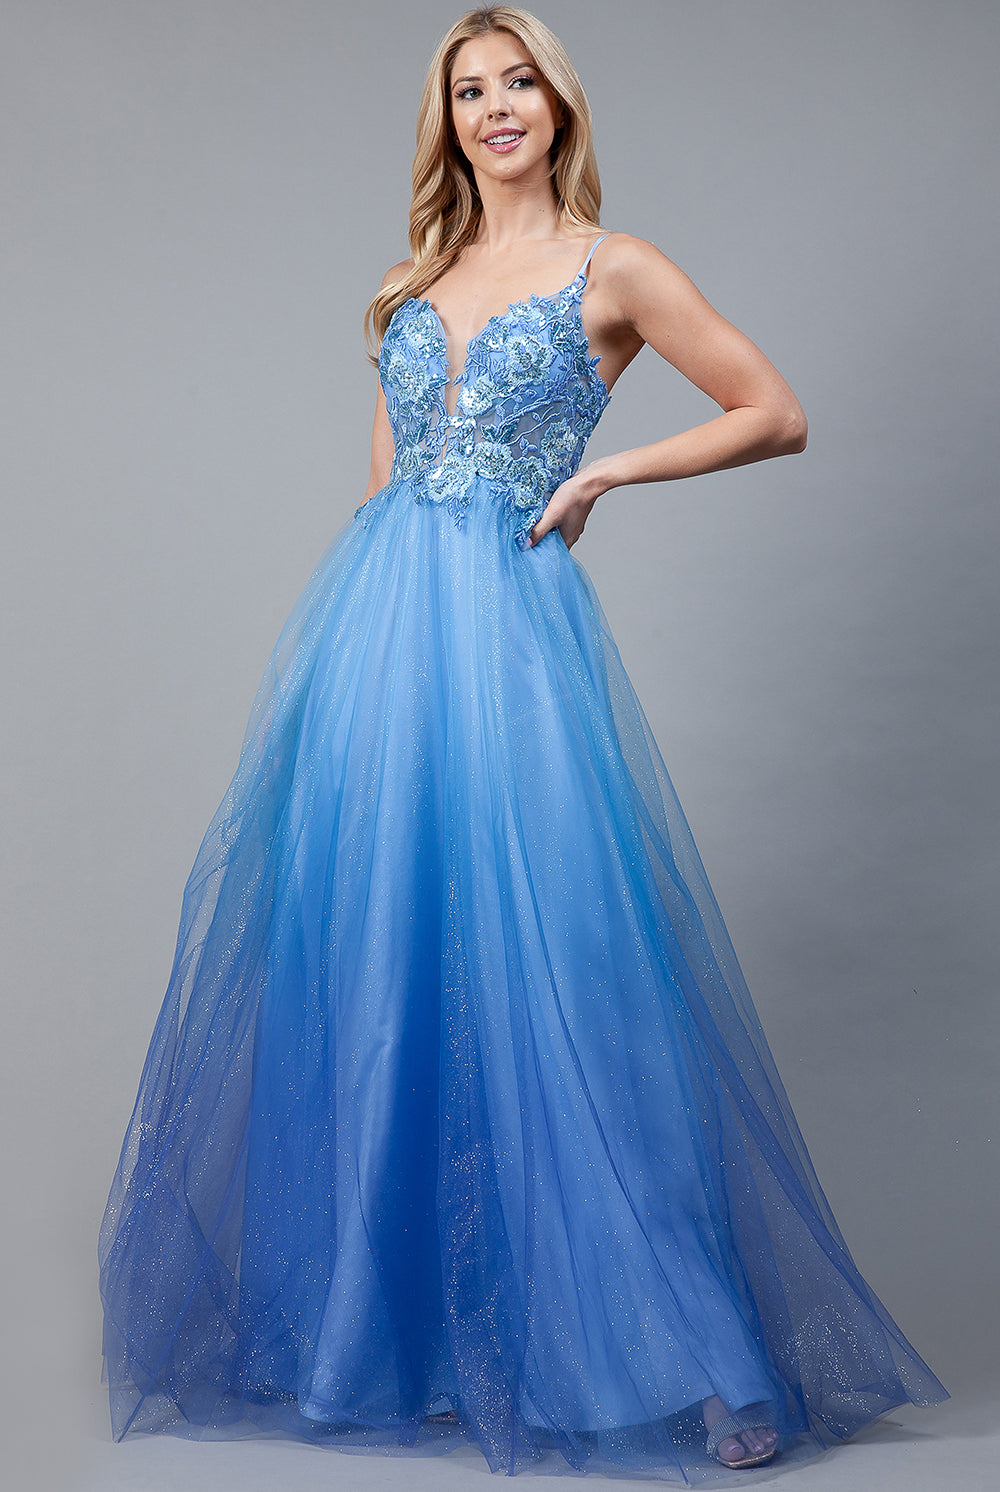 Embroidered Lace Bodice Tulle Glittering Skirt Long Prom Dress AC5040-Prom Dress-smcfashion.com